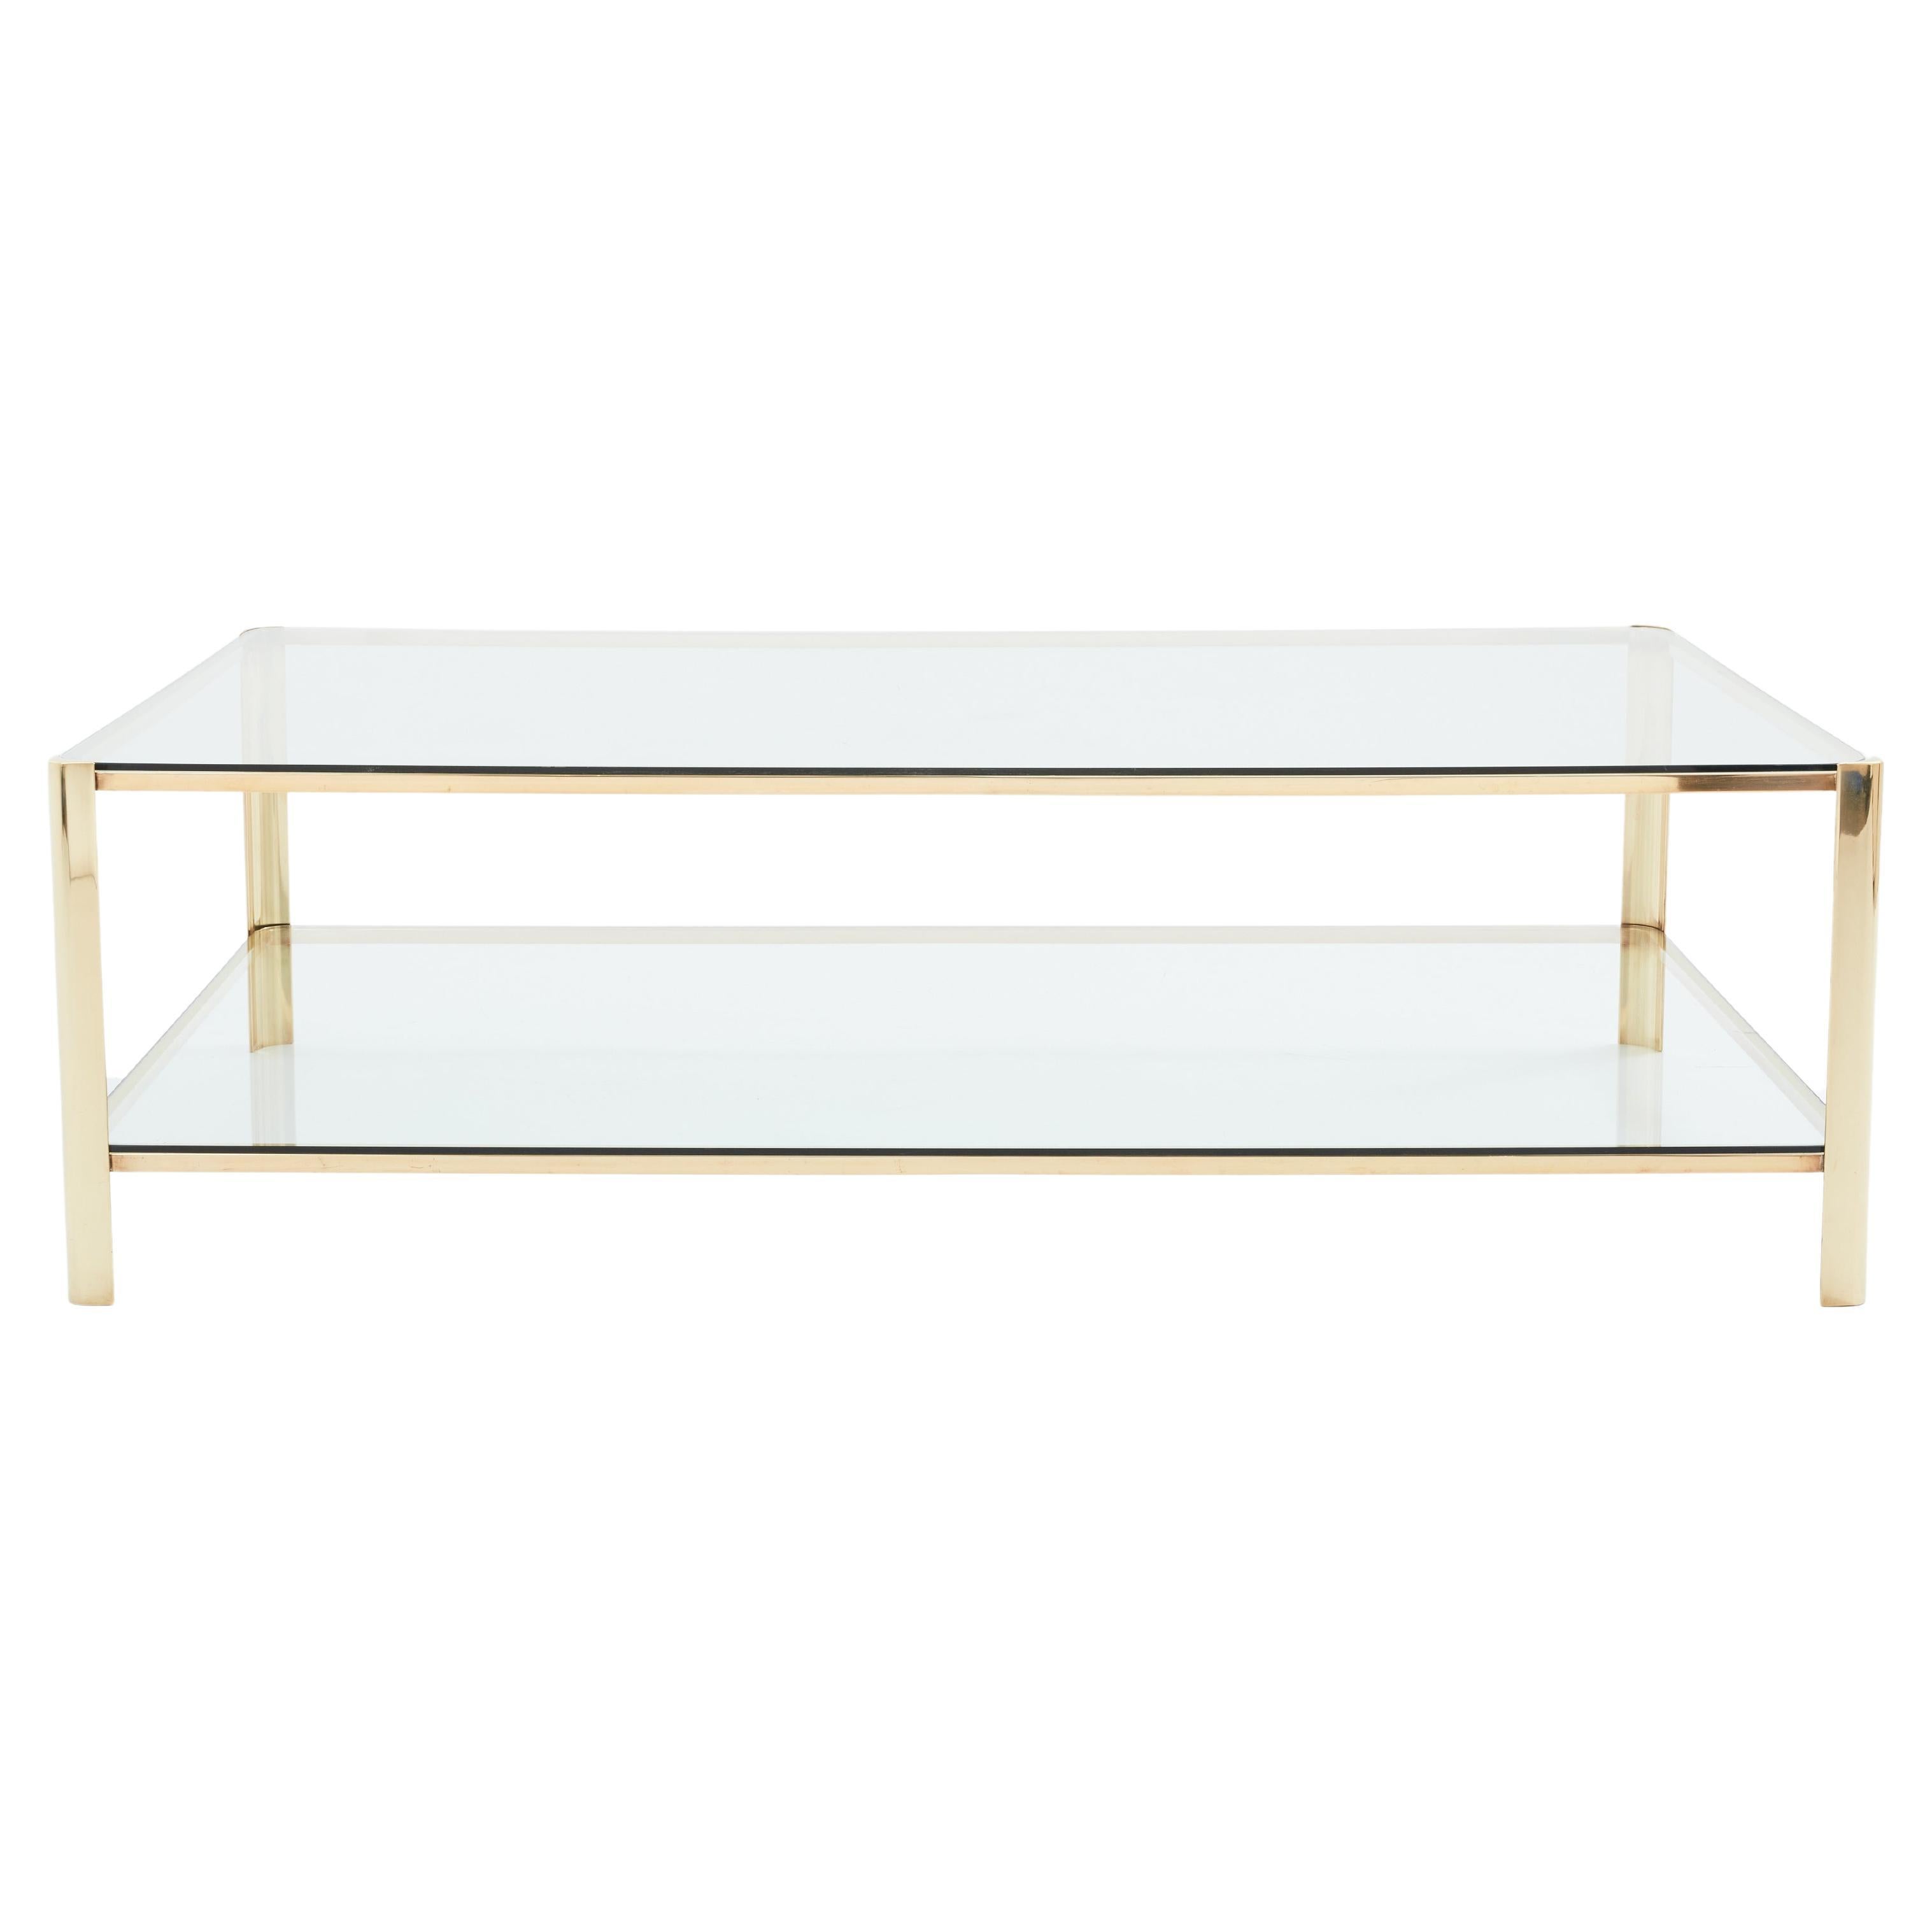 Two-tier Bronze coffee table by Jacques Quinet for Broncz 1960s For Sale